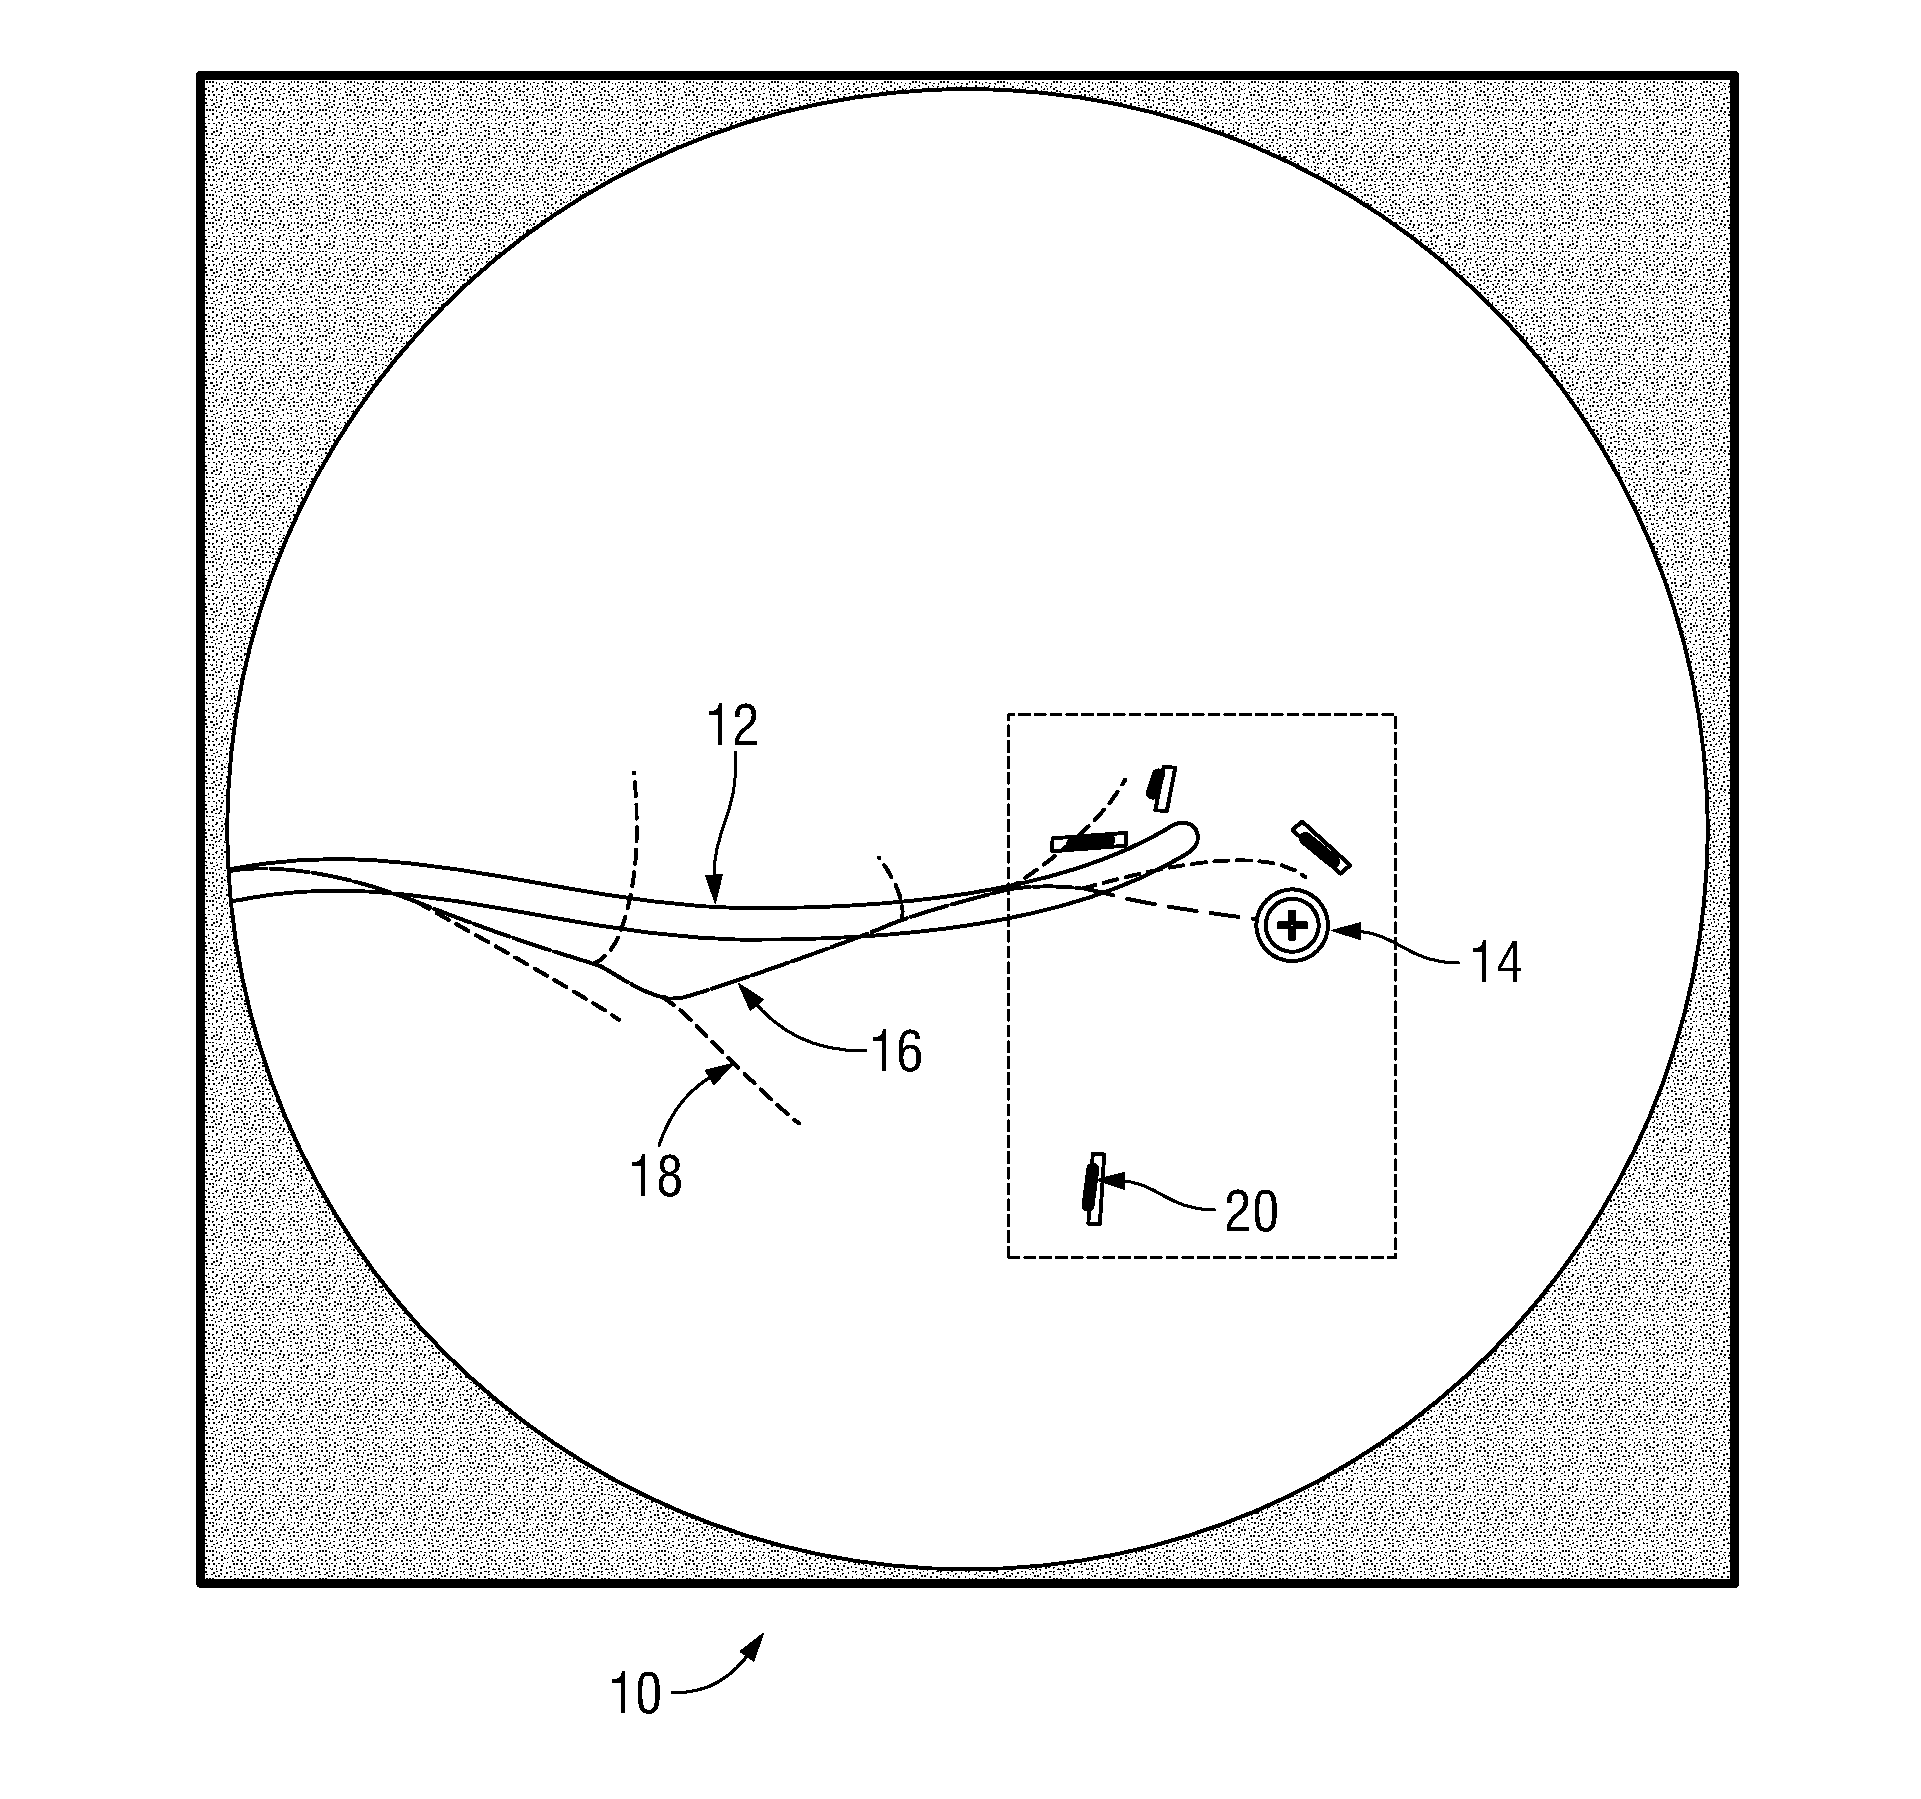 Computed tomography enhanced fluoroscopic system, device, and method of utilizing the same